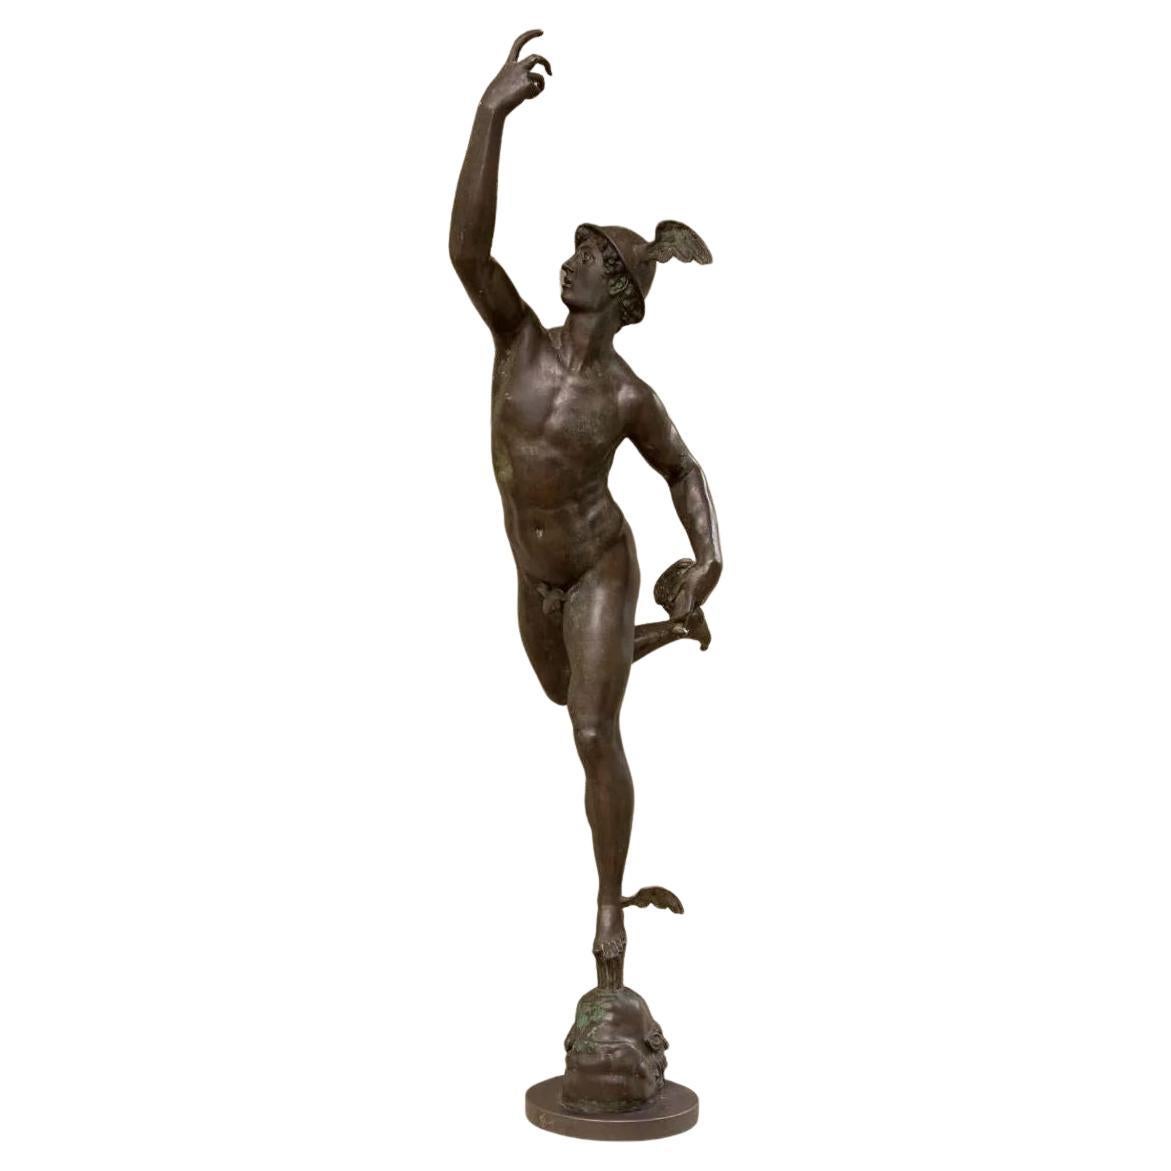 French Artist, Life-Size Statue of Hermes, Bronze, France, 18th Century